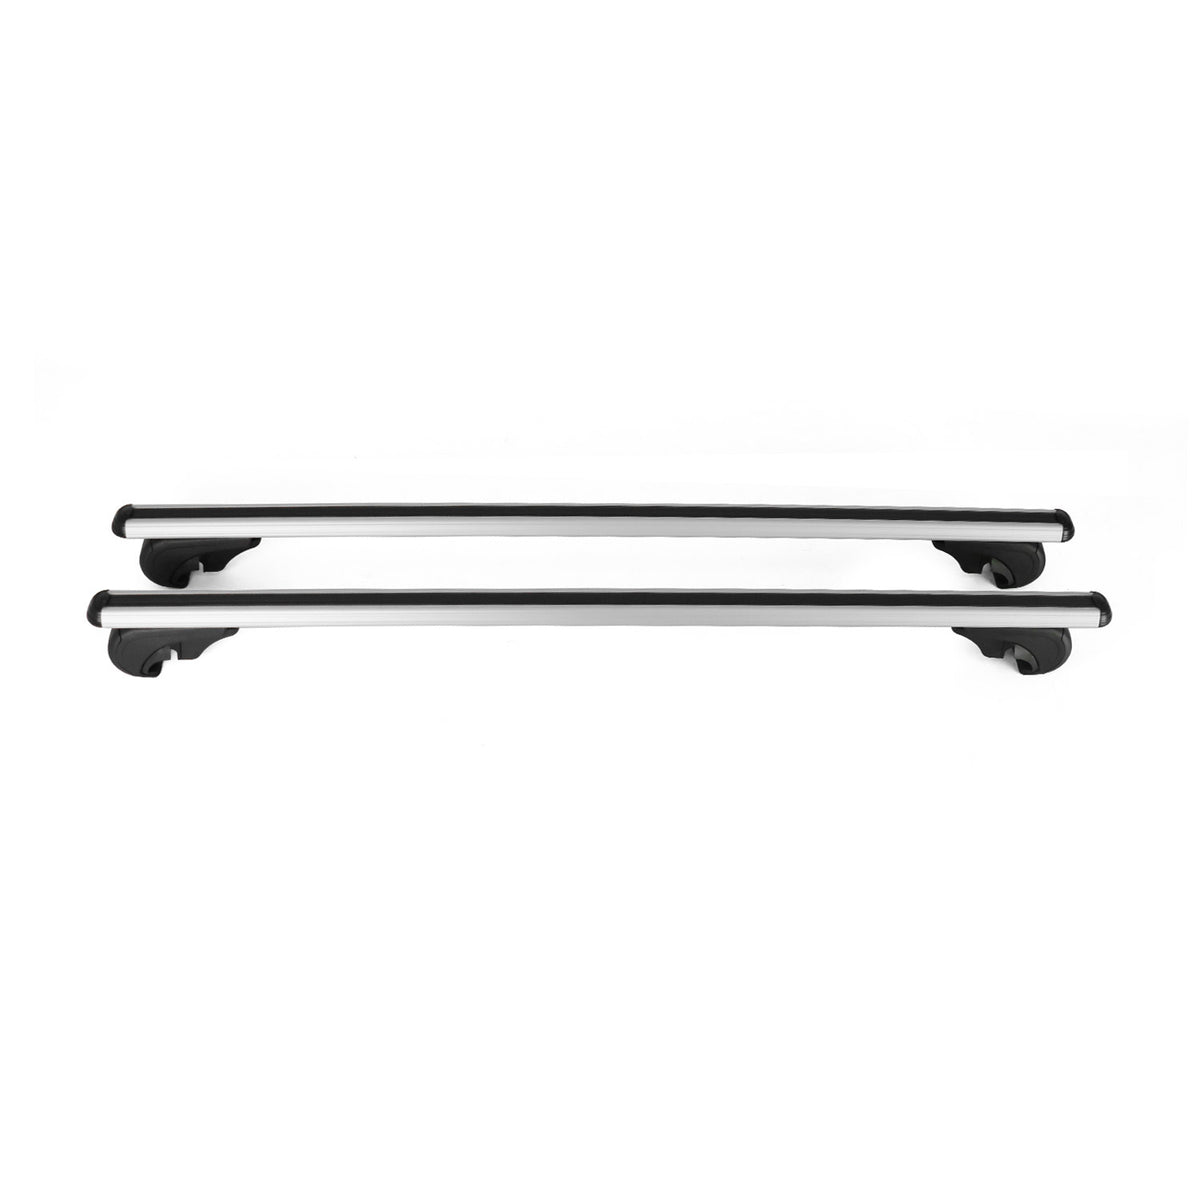 Roof rack for Jeep Patriot 2007-2016 luggage rack base rack aluminum silver 2x